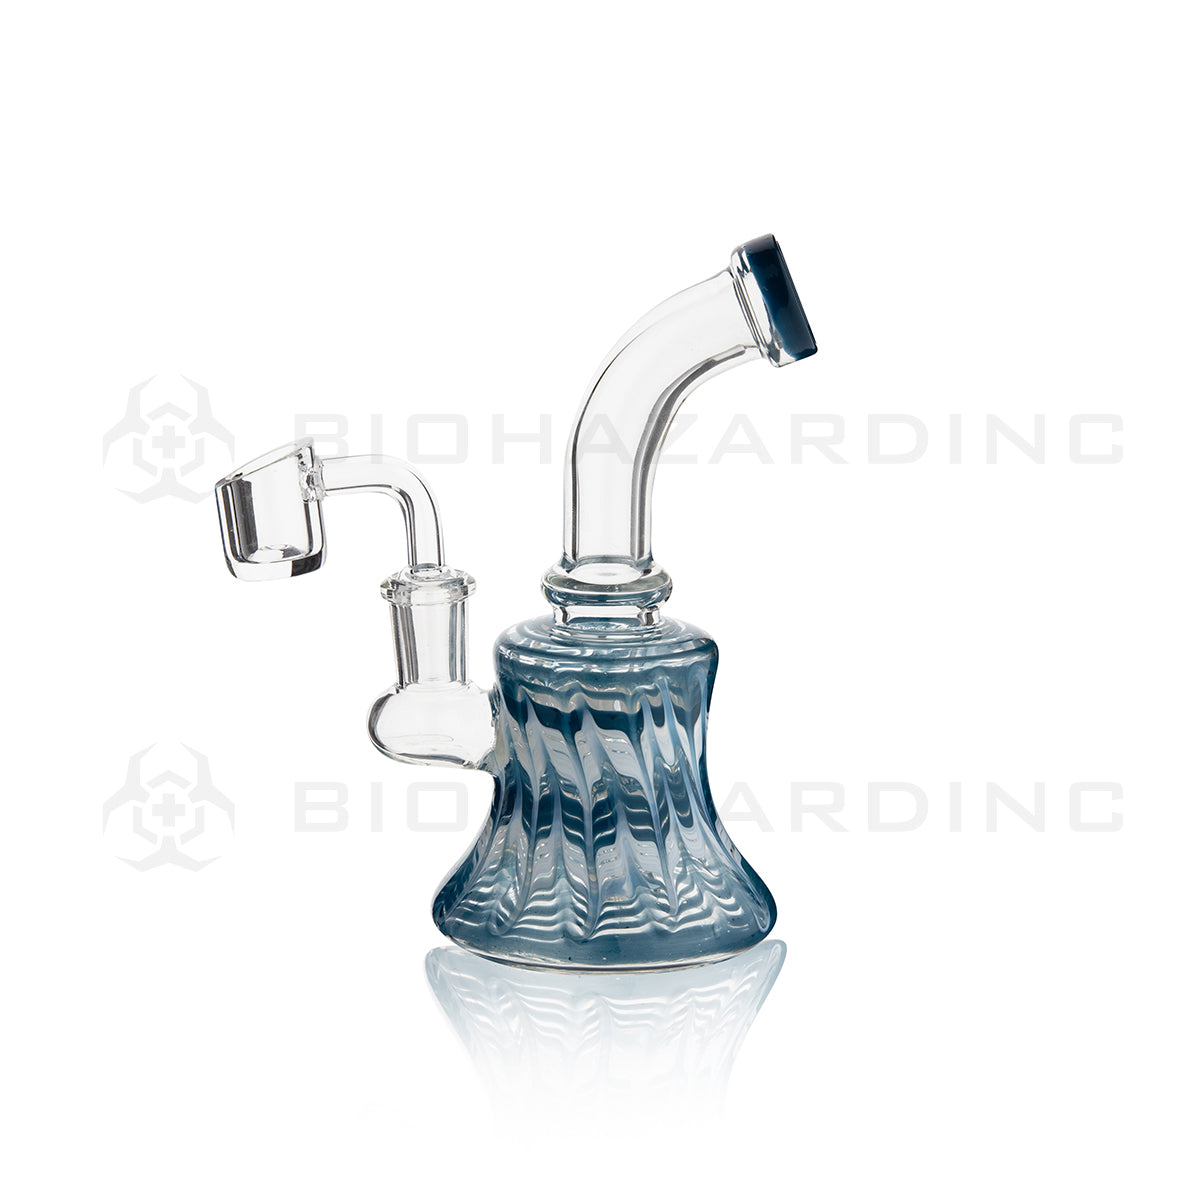 Wrap & Rake | Bent Neck Bell Bottom Water Pipe | 6" - 14mm - Various Colors Glass Dab Rig Biohazard Inc   